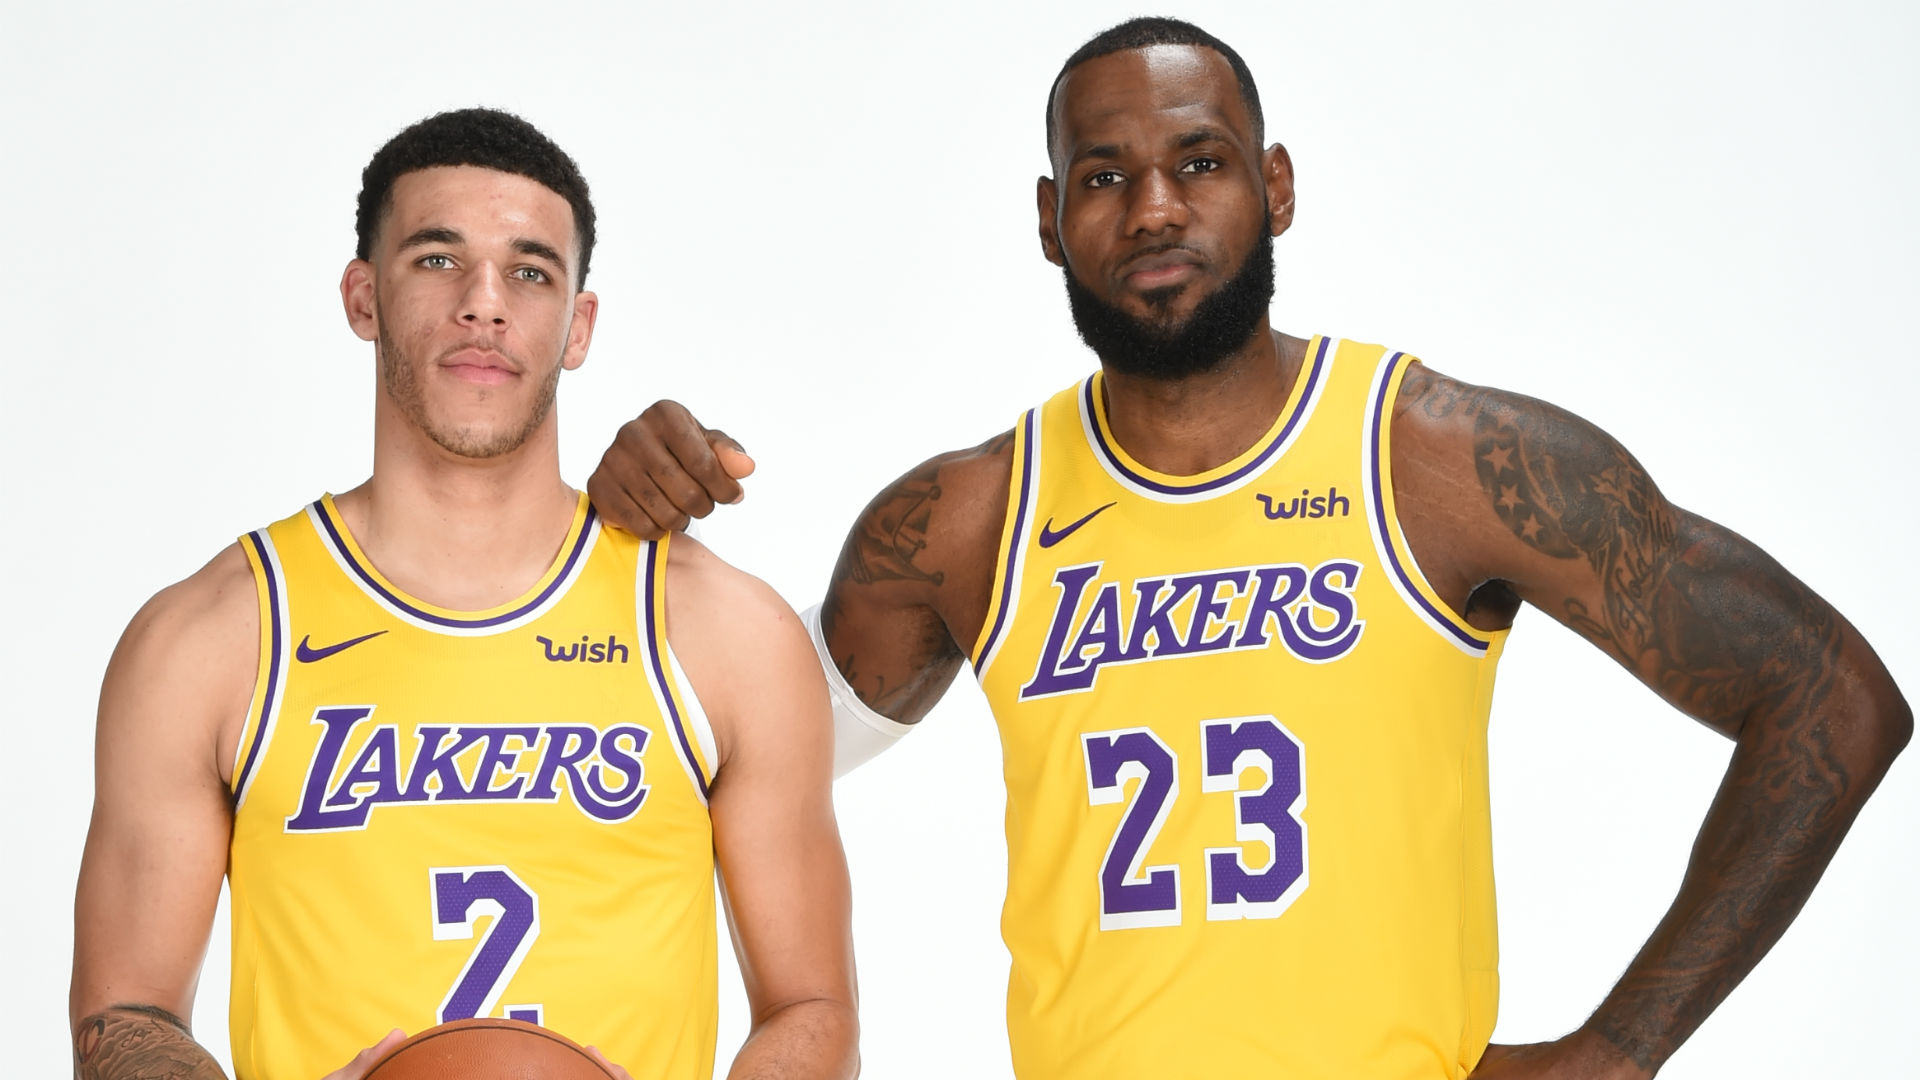 2018/19 NBA Season Preview: What to expect from the Los Angeles Lakers | Sporting News